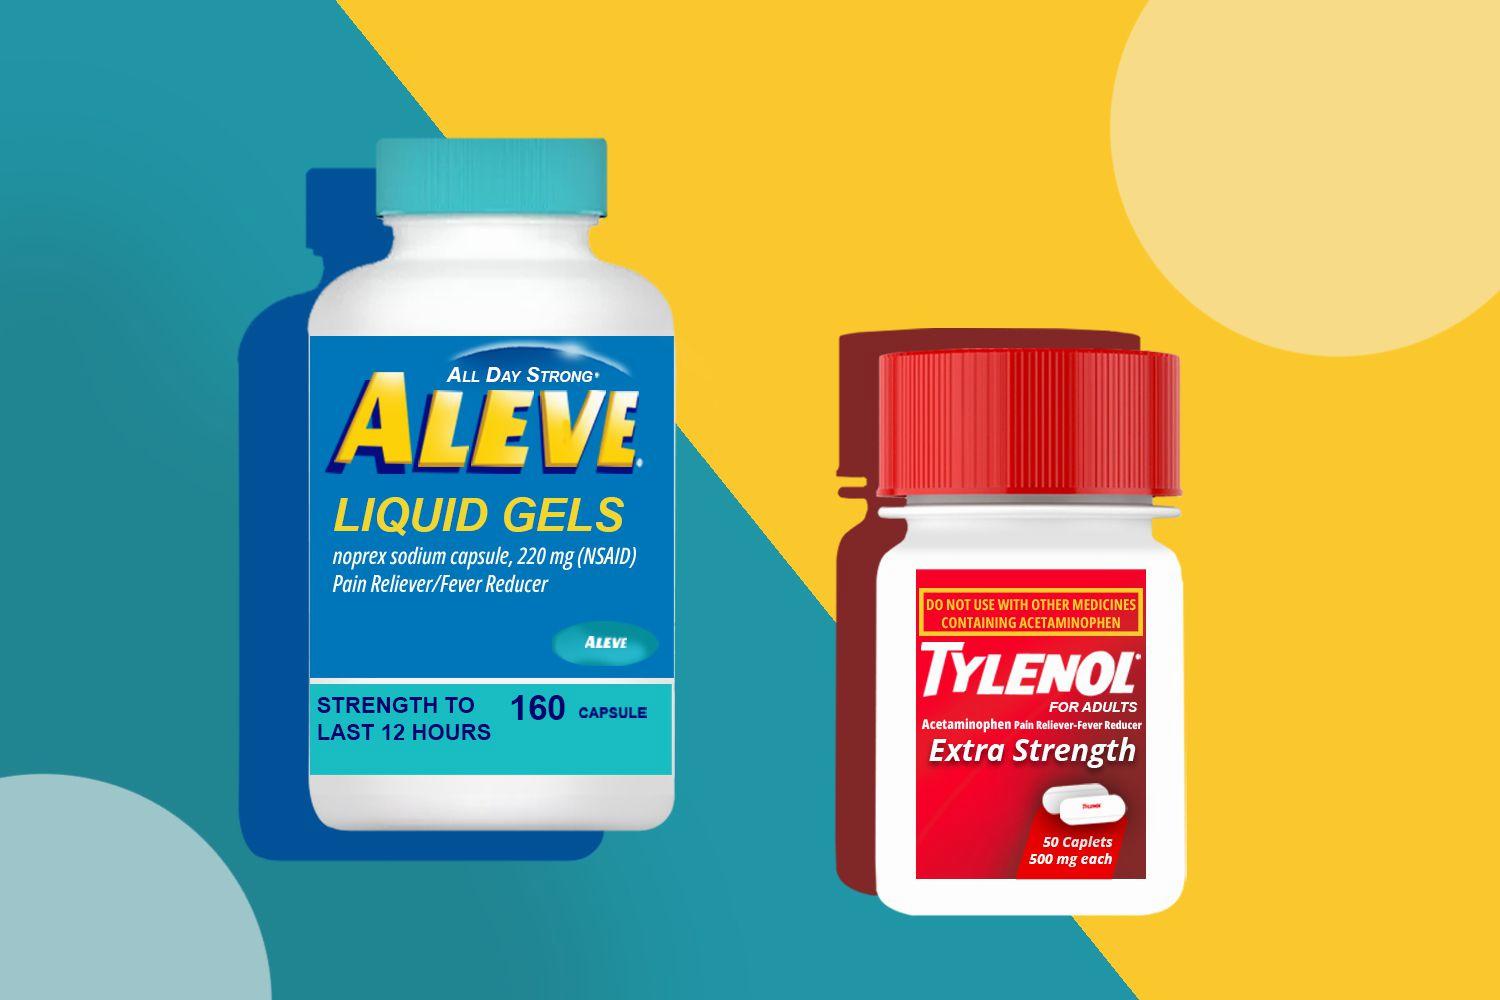 A blue and white bottle of Aleve Liquid Gels and a red and white bottle of Tylenol Extra Strength.